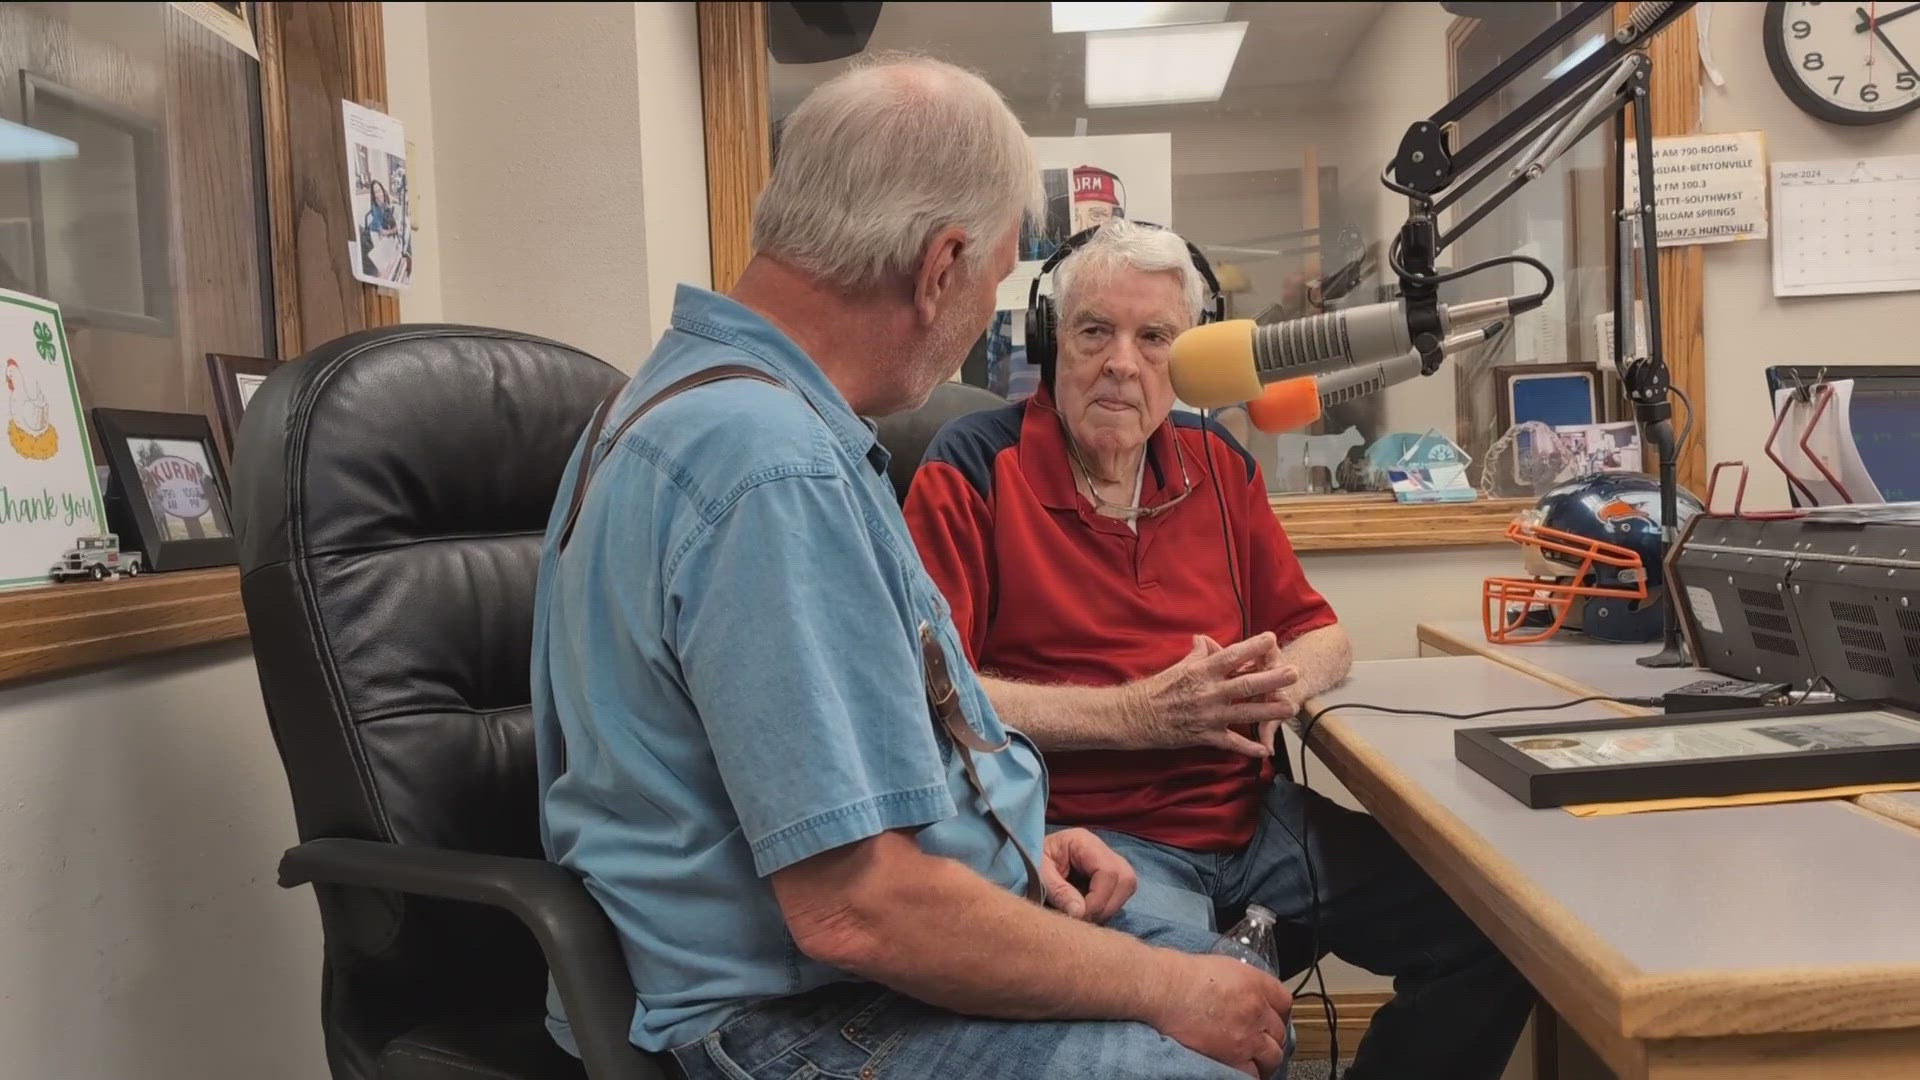 "The Colonel has been such an institution here in Northwest Arkansas," Former Gov. Asa Hutchinson said. "It's sort of the end of an era in radio."